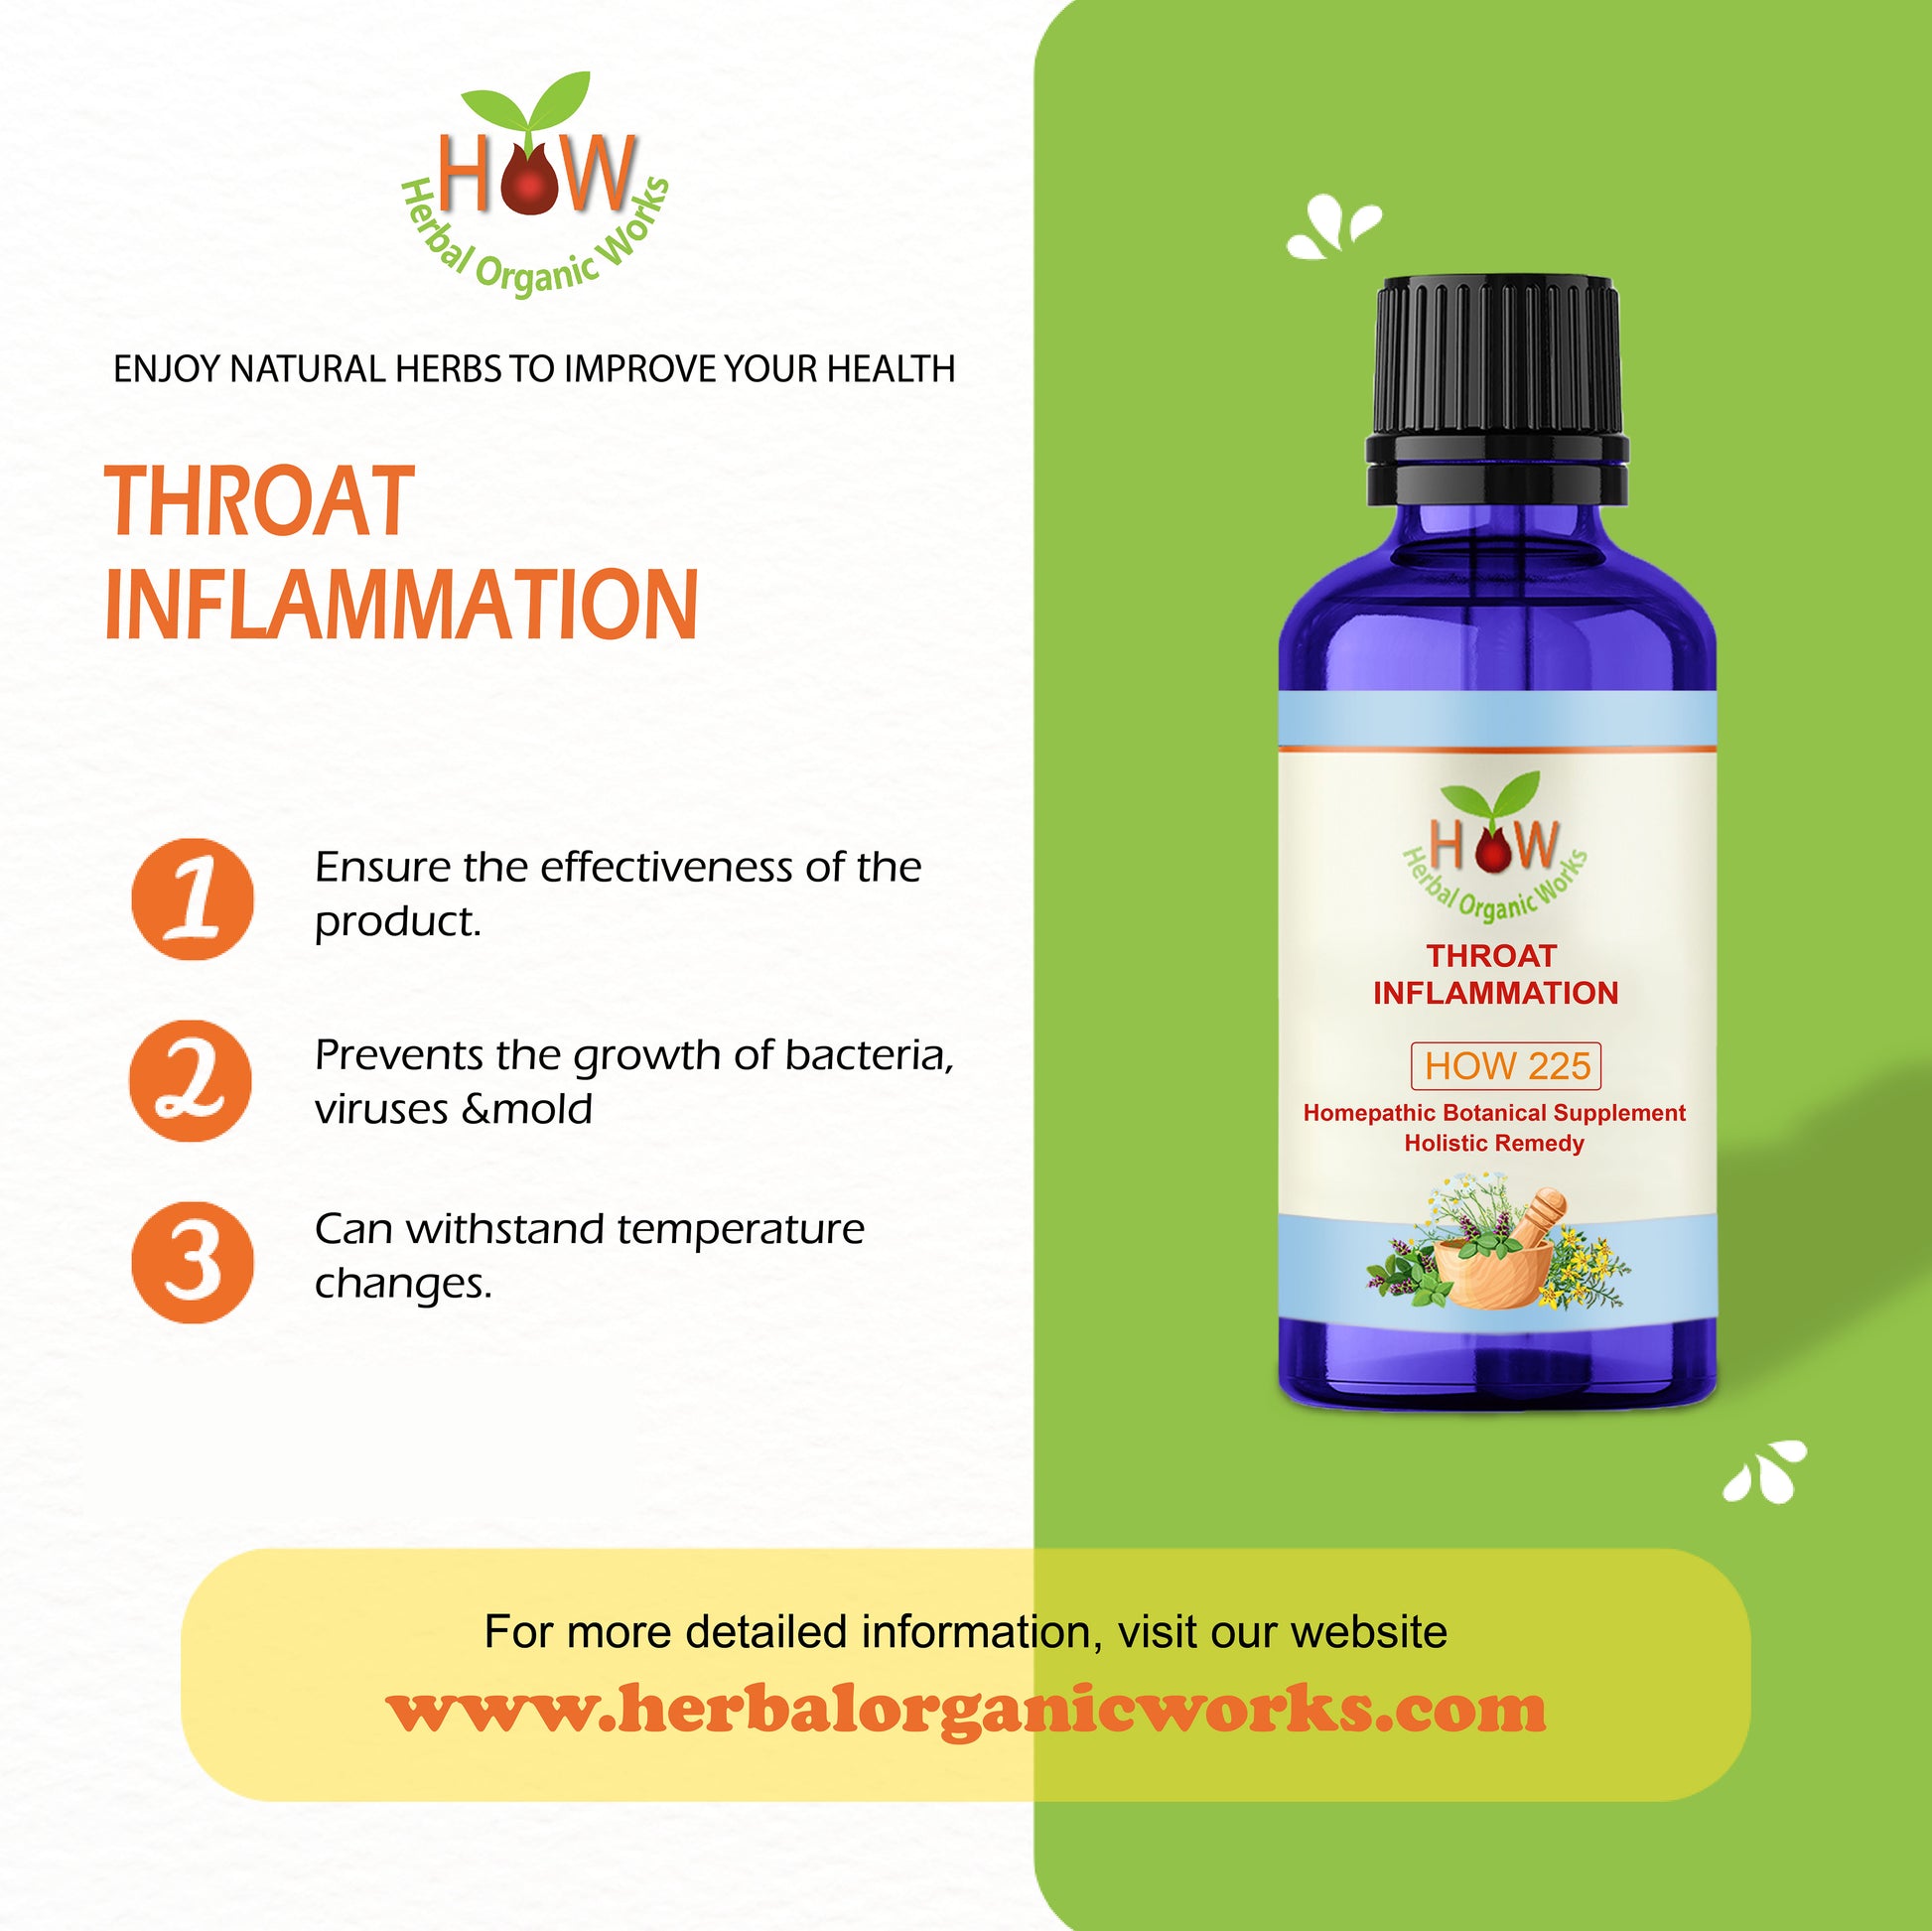 NATURAL REMEDY FOR THROAT INFLAMMATION (HOW225)